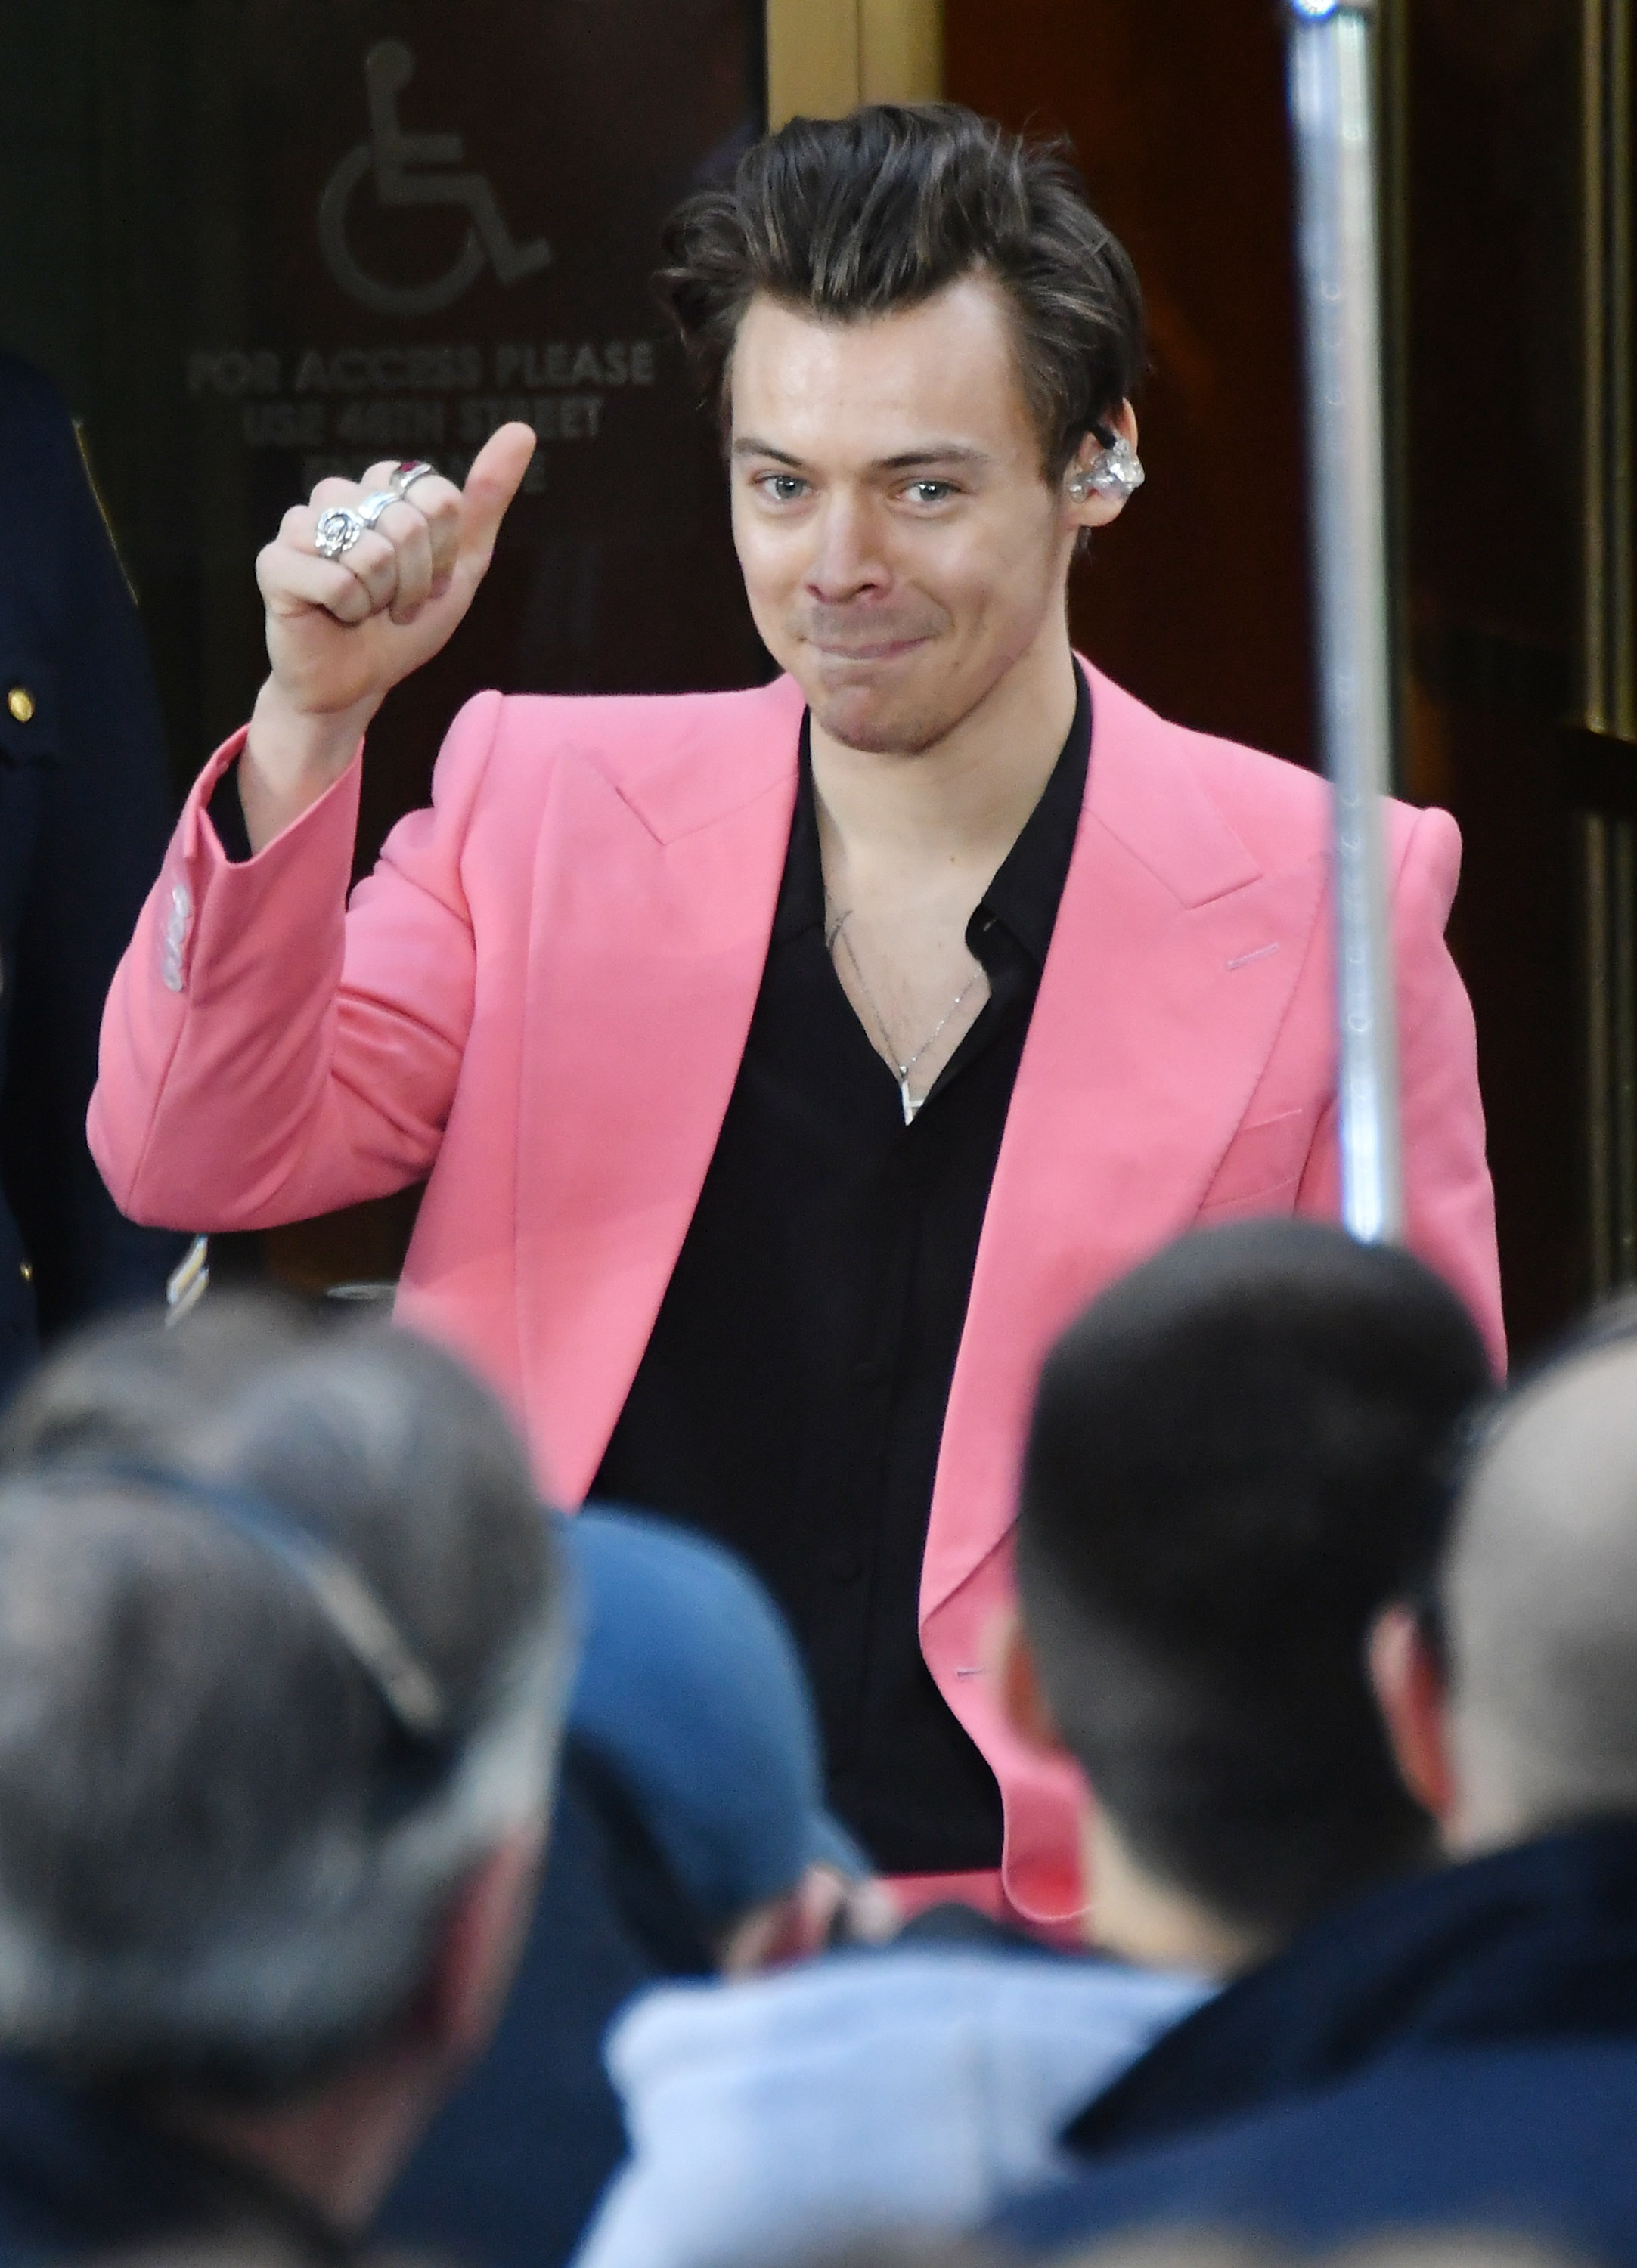 Harry Styles on NBC's Today Show